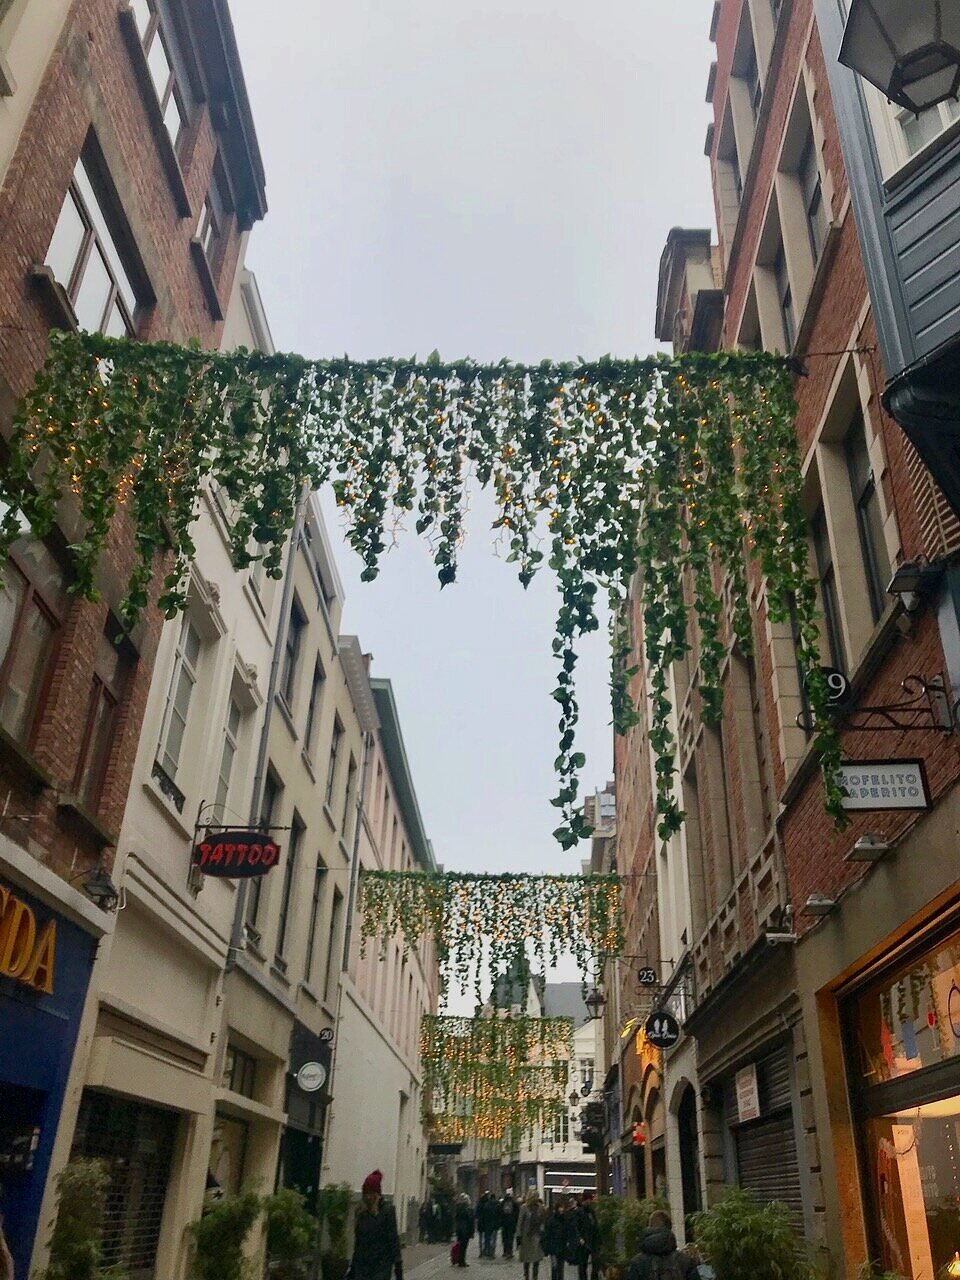 The city is beautifully decorated with ivy, twinkling lights and glitter all for the Christmas season.